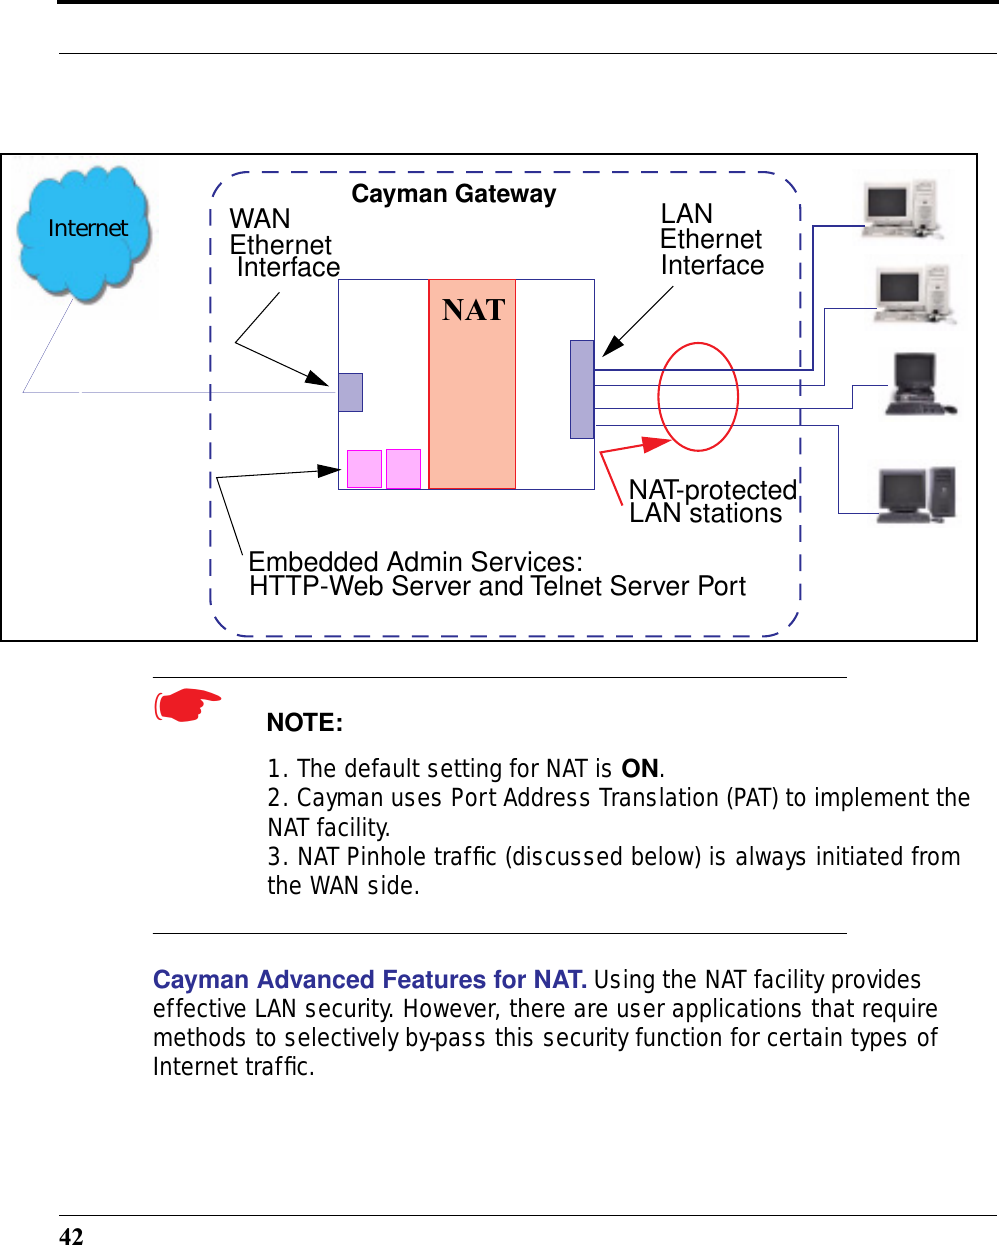 42 ☛  NOTE:1. The default setting for NAT is ON.2. Cayman uses Port Address Translation (PAT) to implement the NAT facility.3. NAT Pinhole trafﬁc (discussed below) is always initiated from the WAN side.Cayman Advanced Features for NAT. Using the NAT facility provides effective LAN security. However, there are user applications that require methods to selectively by-pass this security function for certain types of Internet trafﬁc.WAN InterfaceLANEthernet InterfaceCayman GatewayNATInternetEmbedded Admin Services:HTTP-Web Server and Telnet Server PortNAT-protectedLAN stationsEthernet